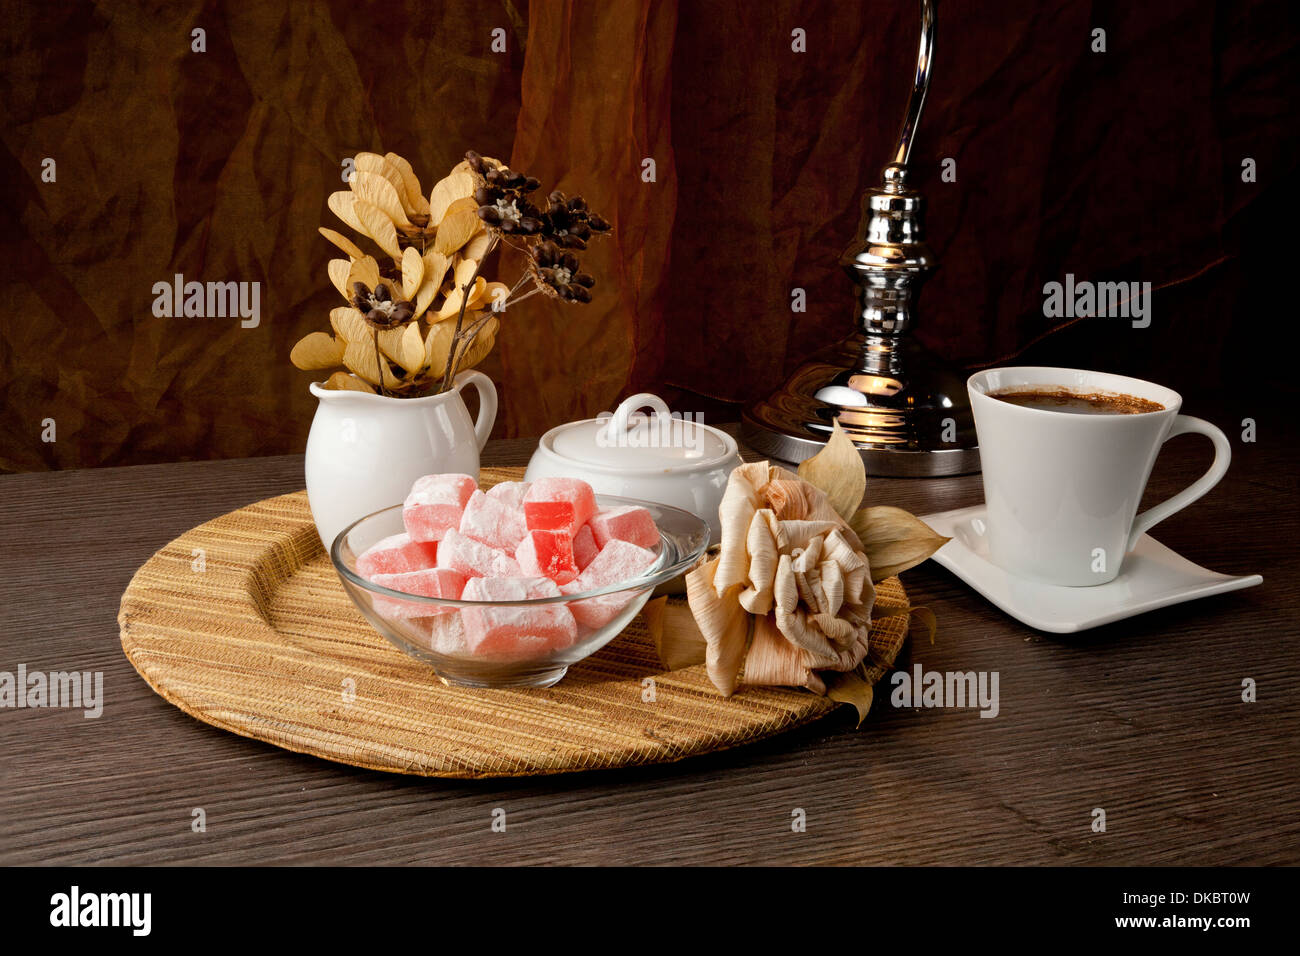 Turkish delight (lokum) confection with coffee pot Stock Photo